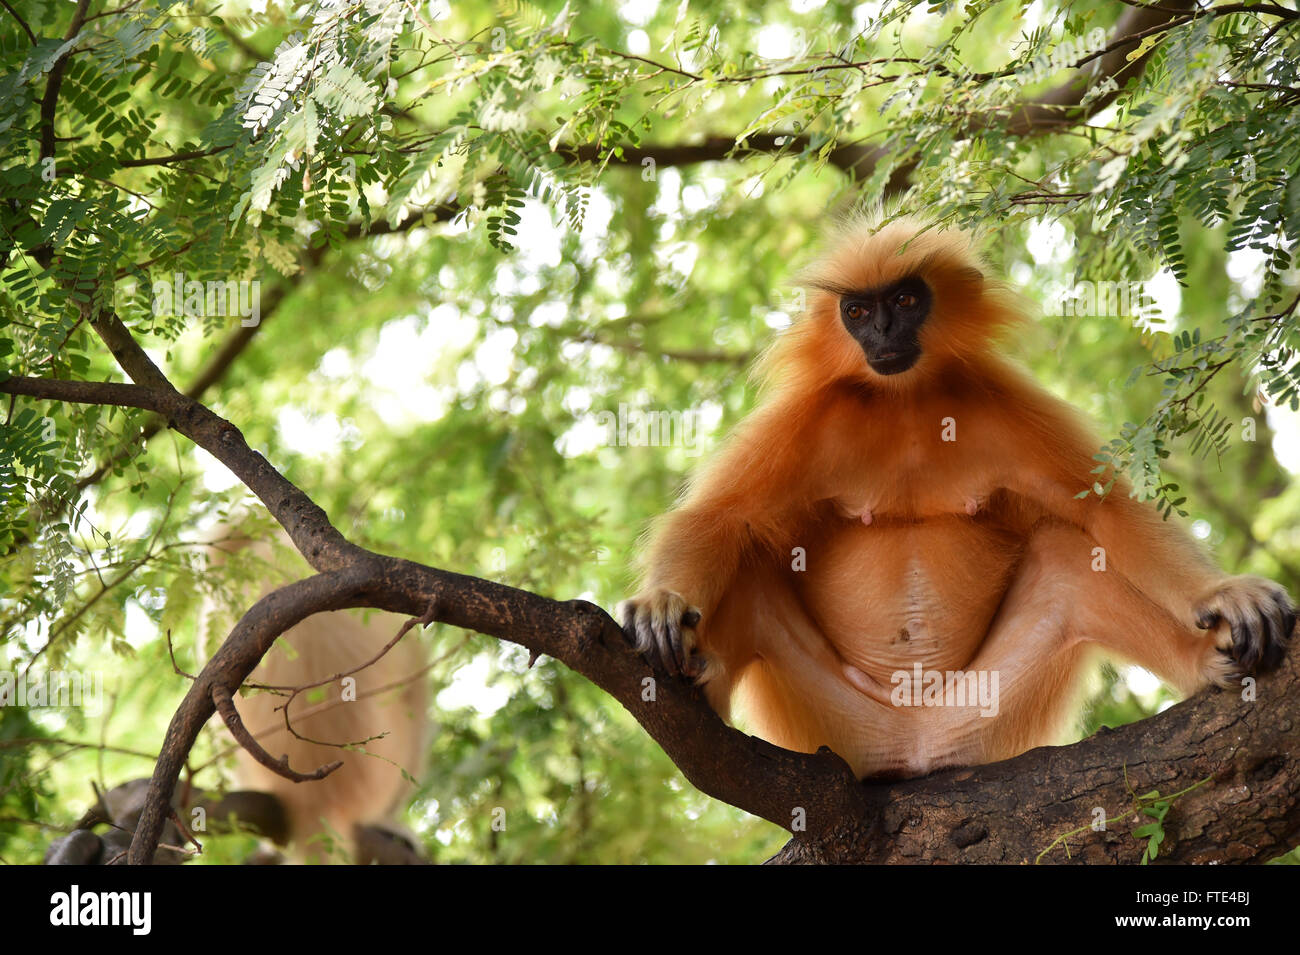 Gee's golden langur (Golden Monkey) an Old World monkey found in Assam,India.It is one of the most endangered primate species Stock Photo